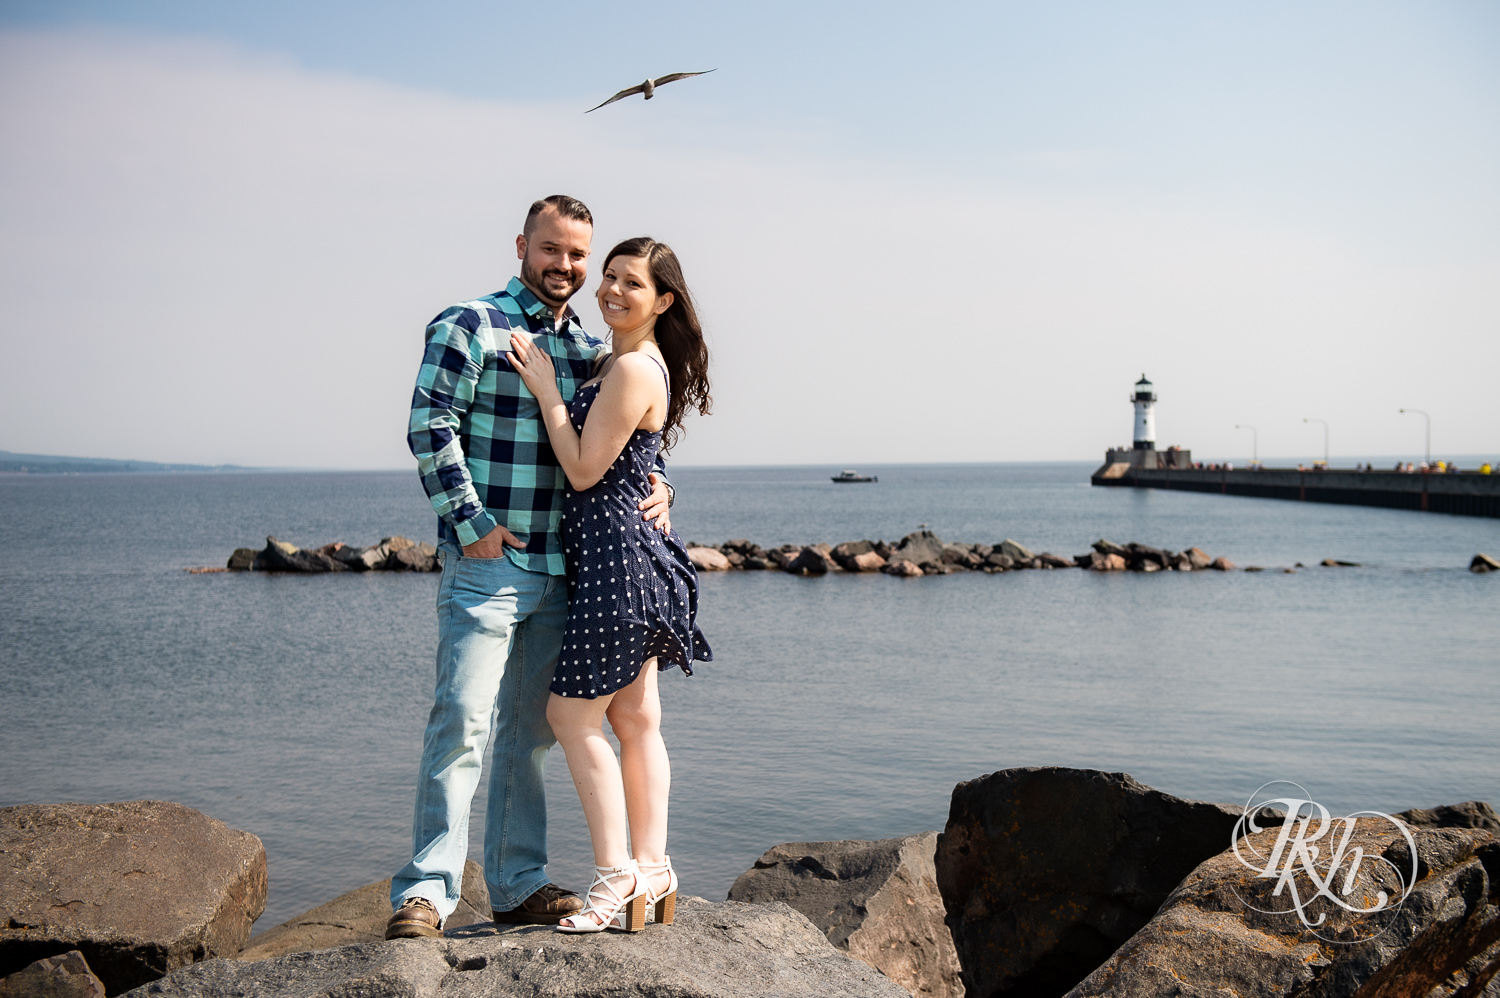 Man and woman smile in front of Lake Superior in Canal Park in Duluth, Minnesota with bird flying over them.